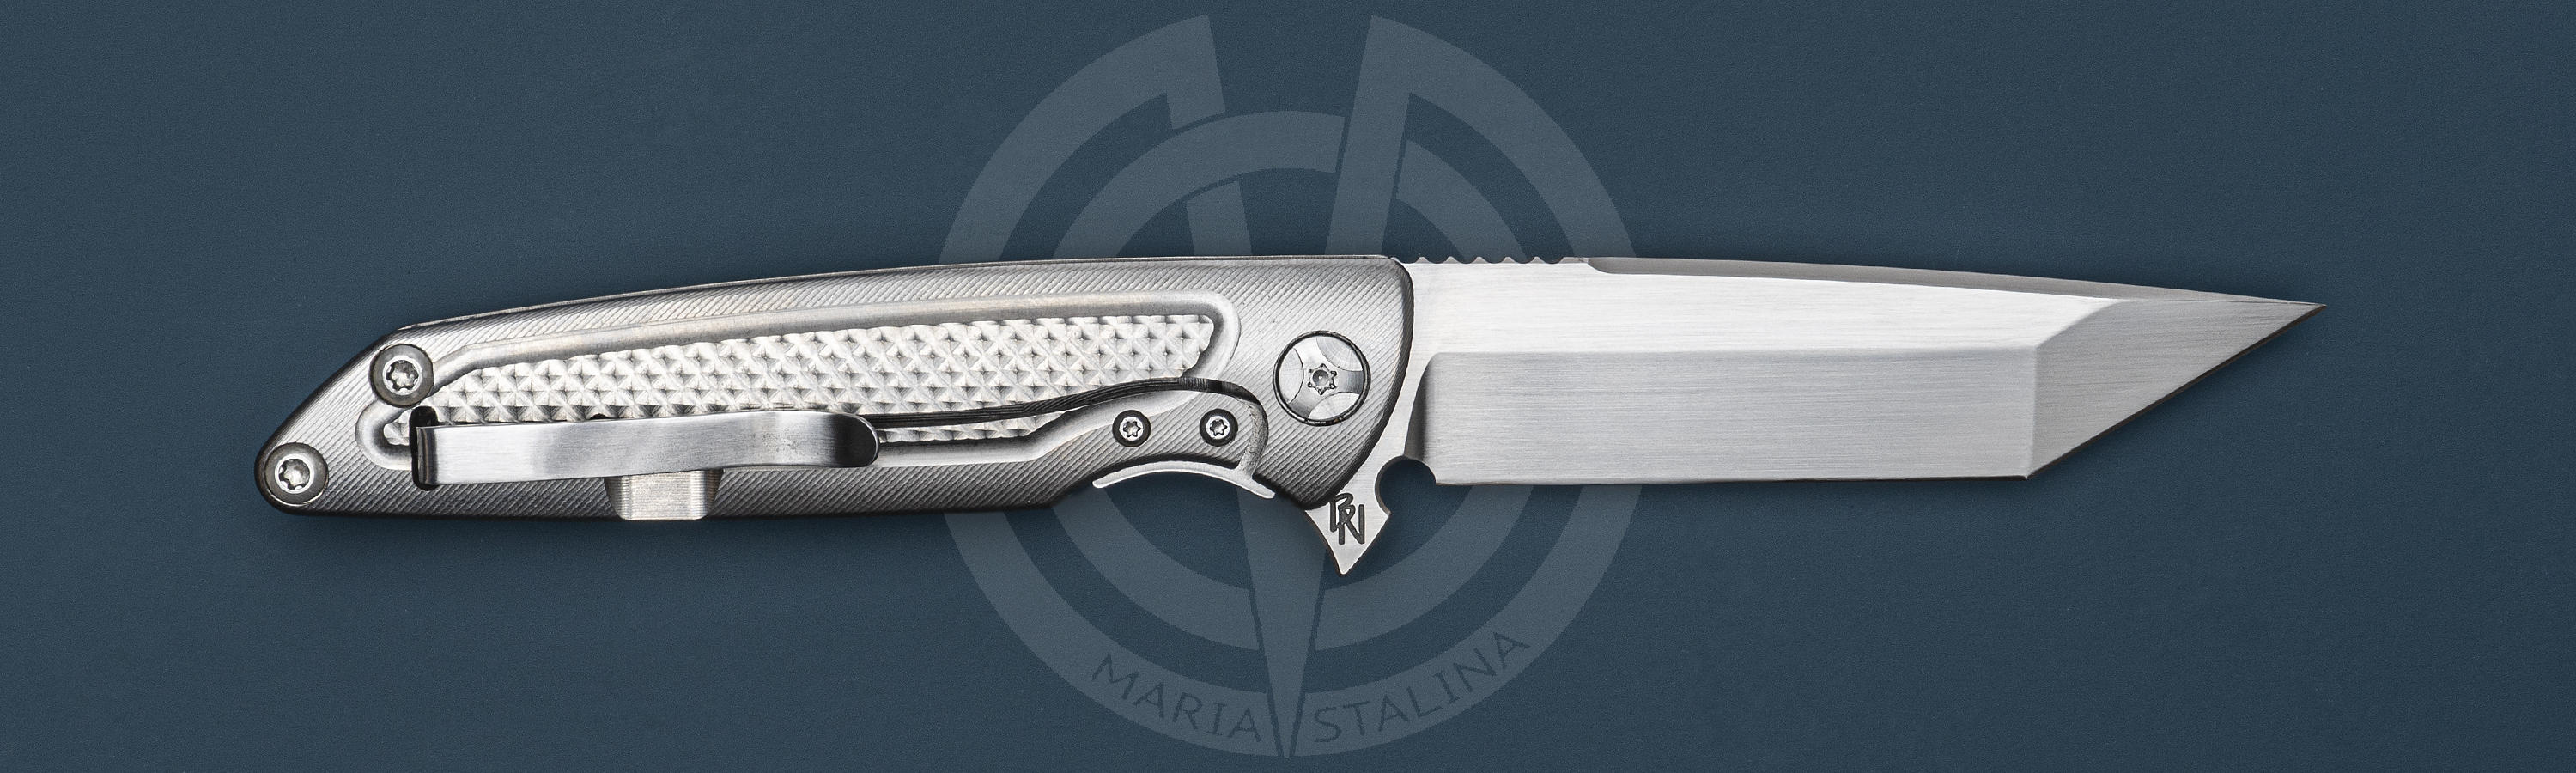 Blade material S35VN